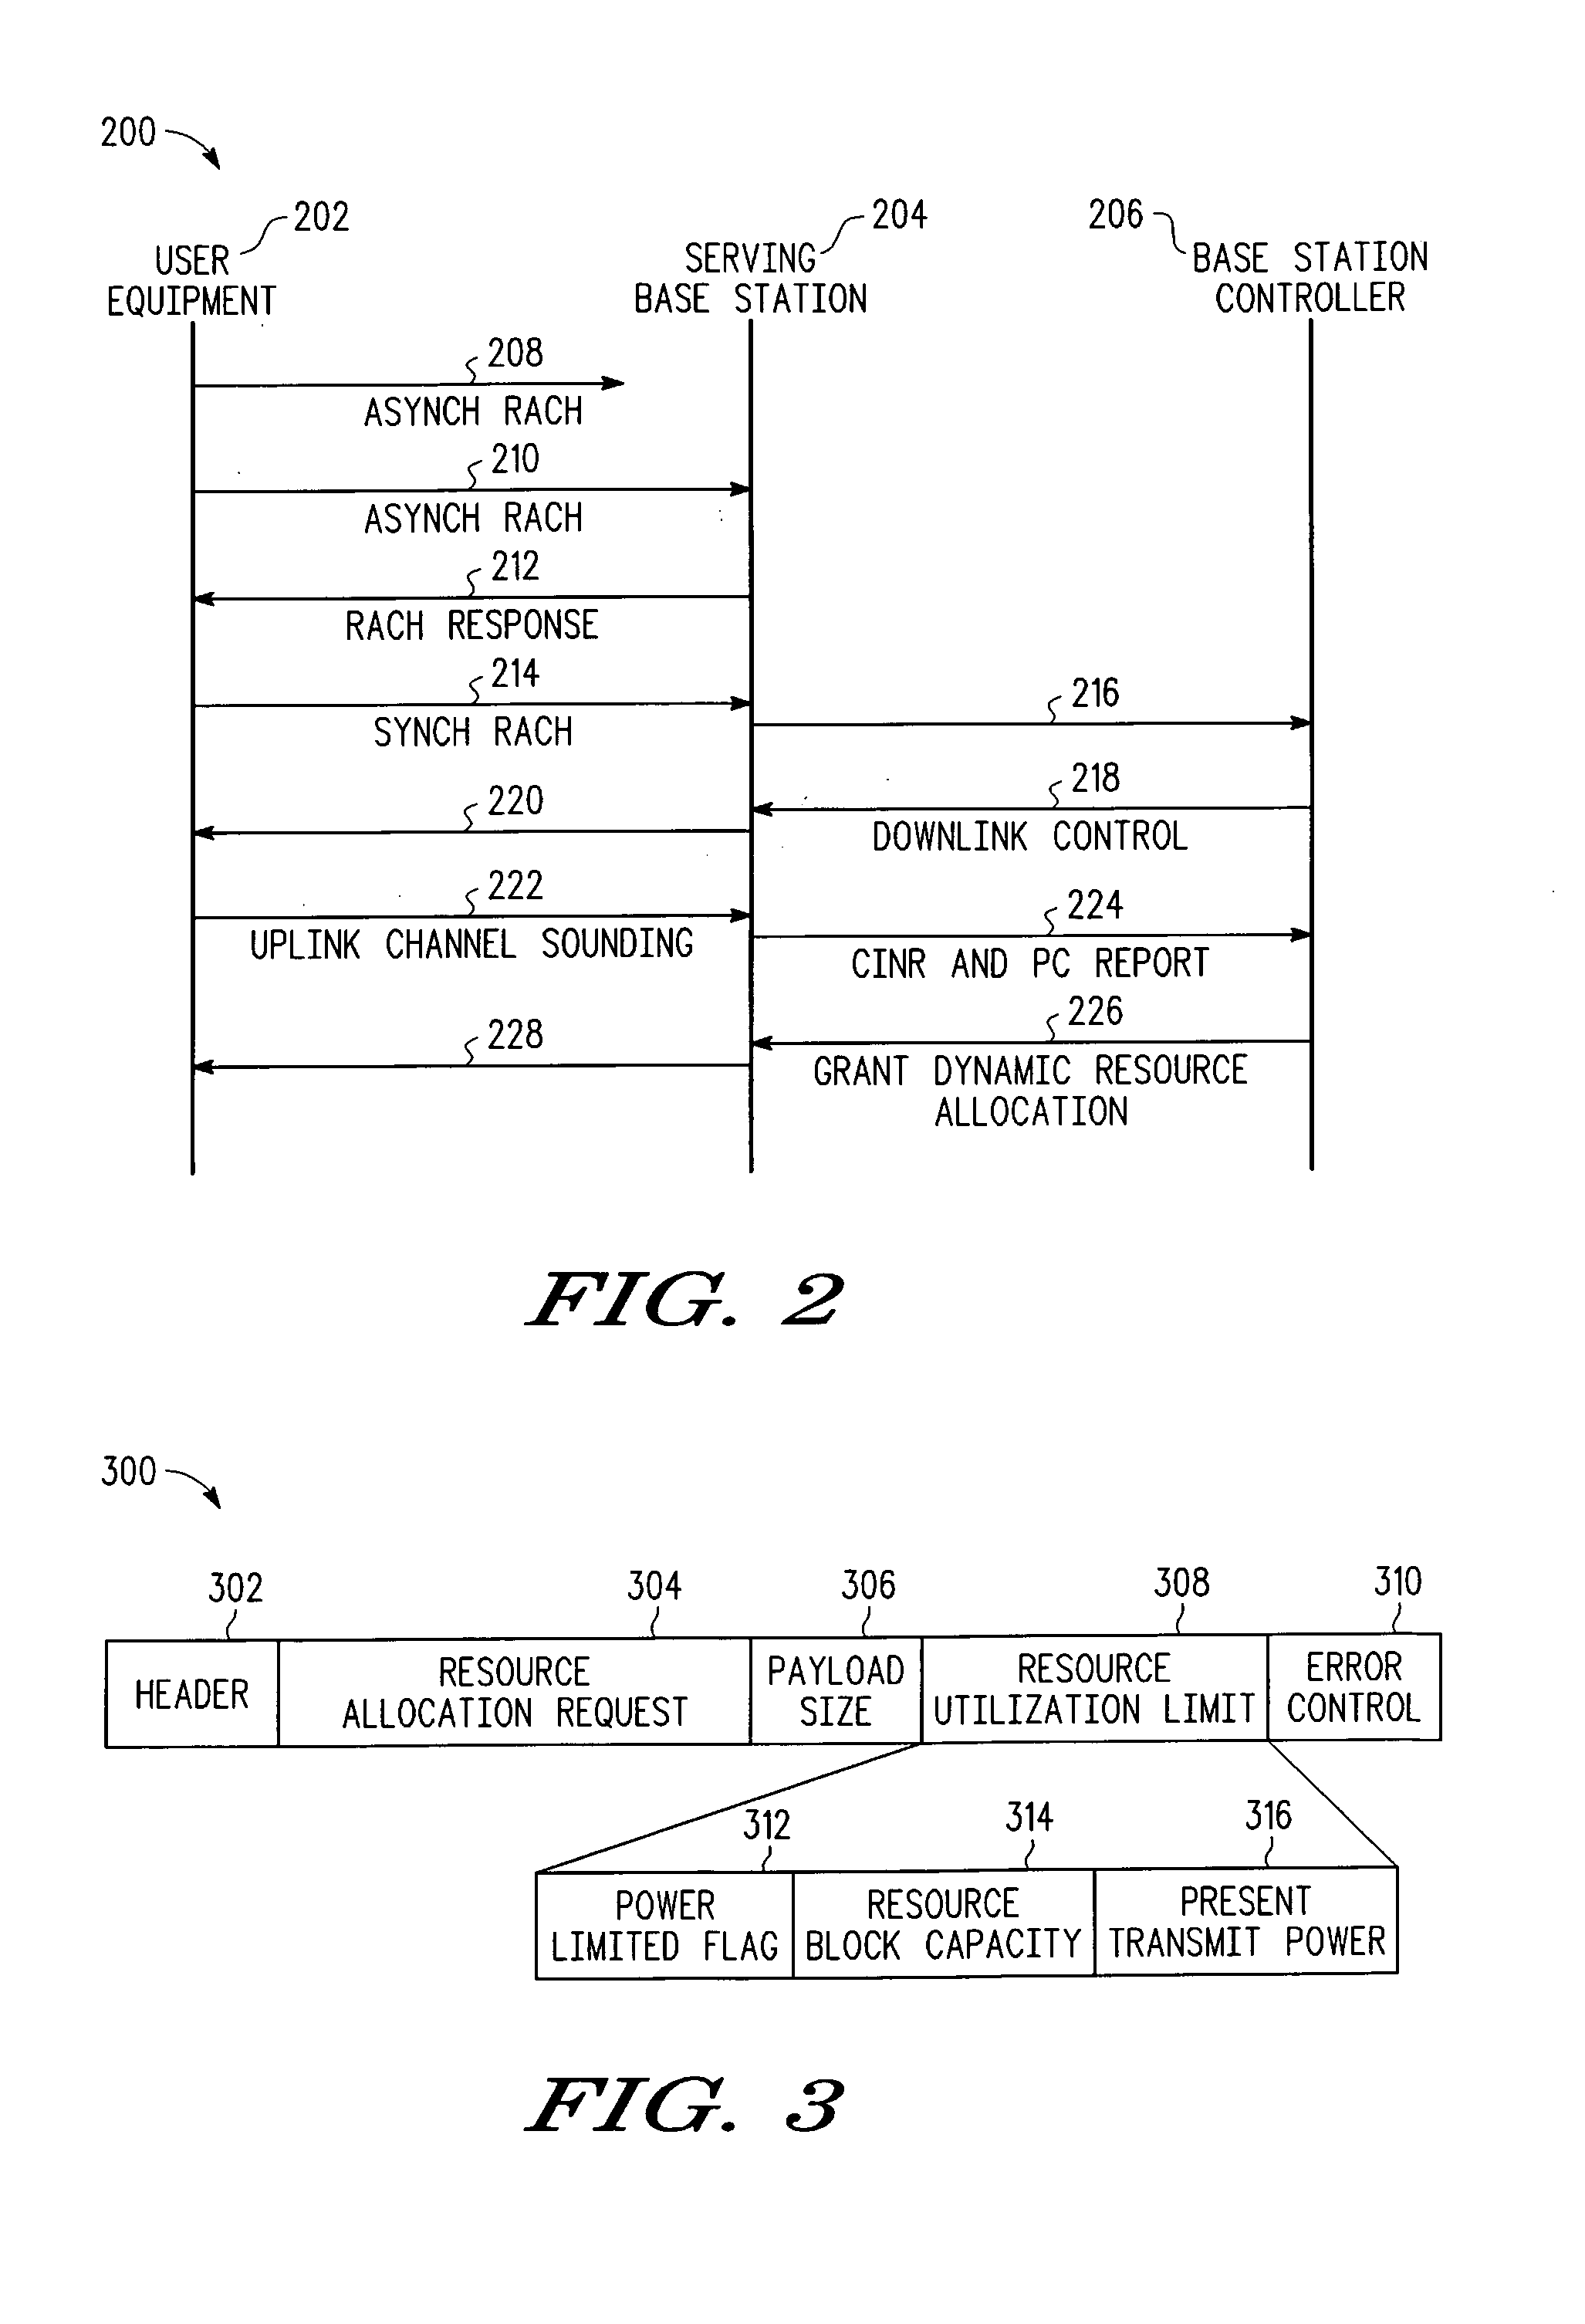 Resource allocation in a communication system